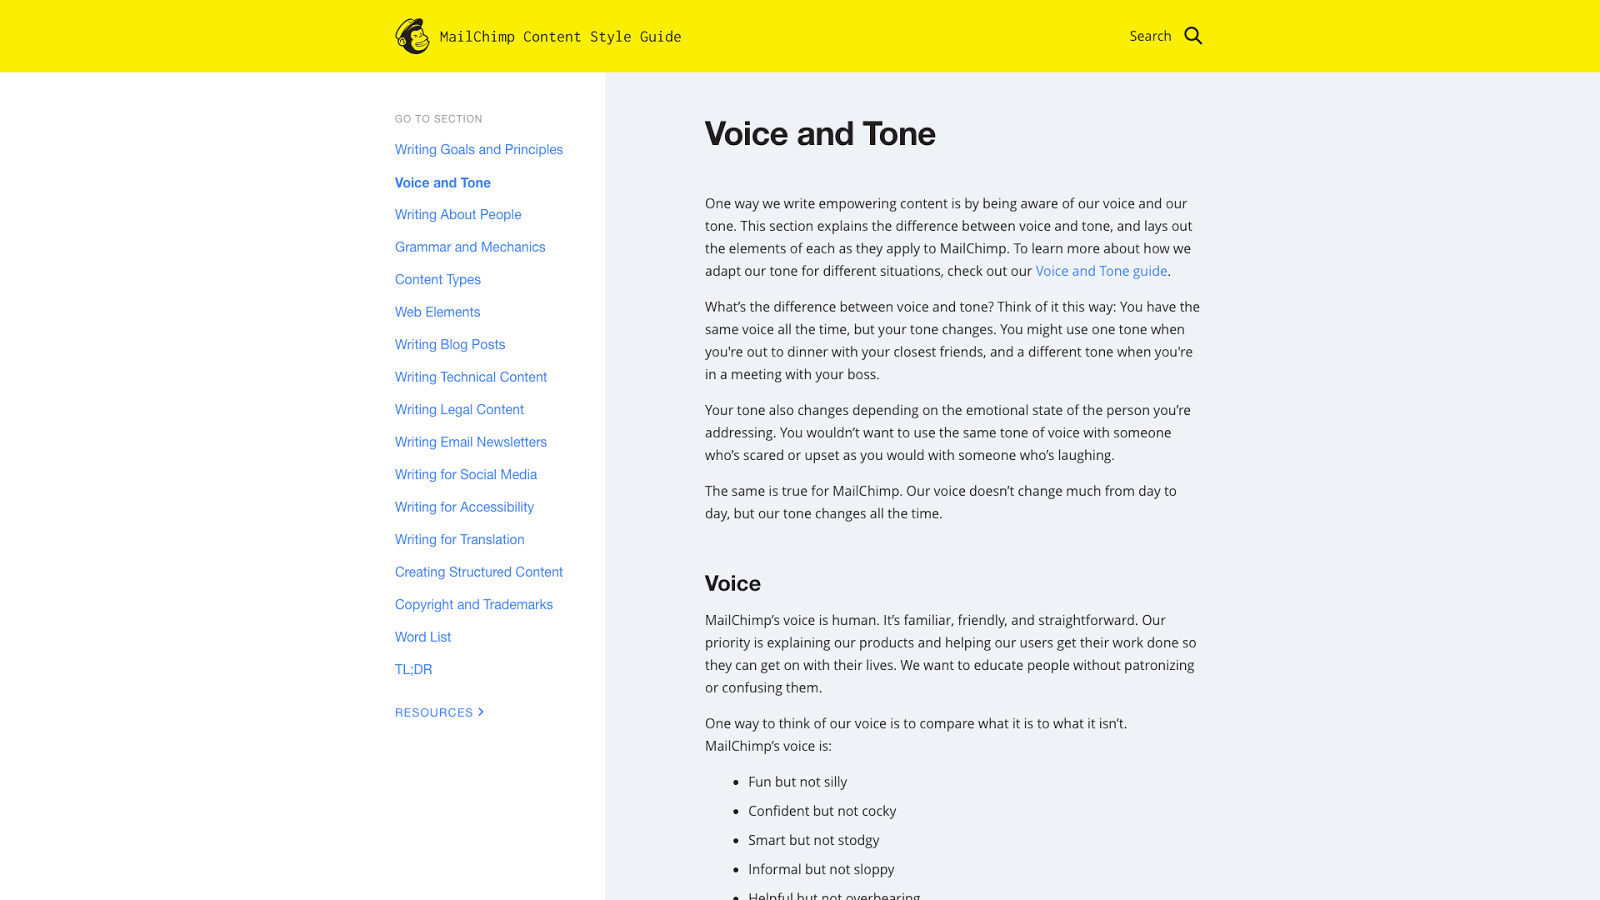 Mail Chimp's guidelines for voice and tone